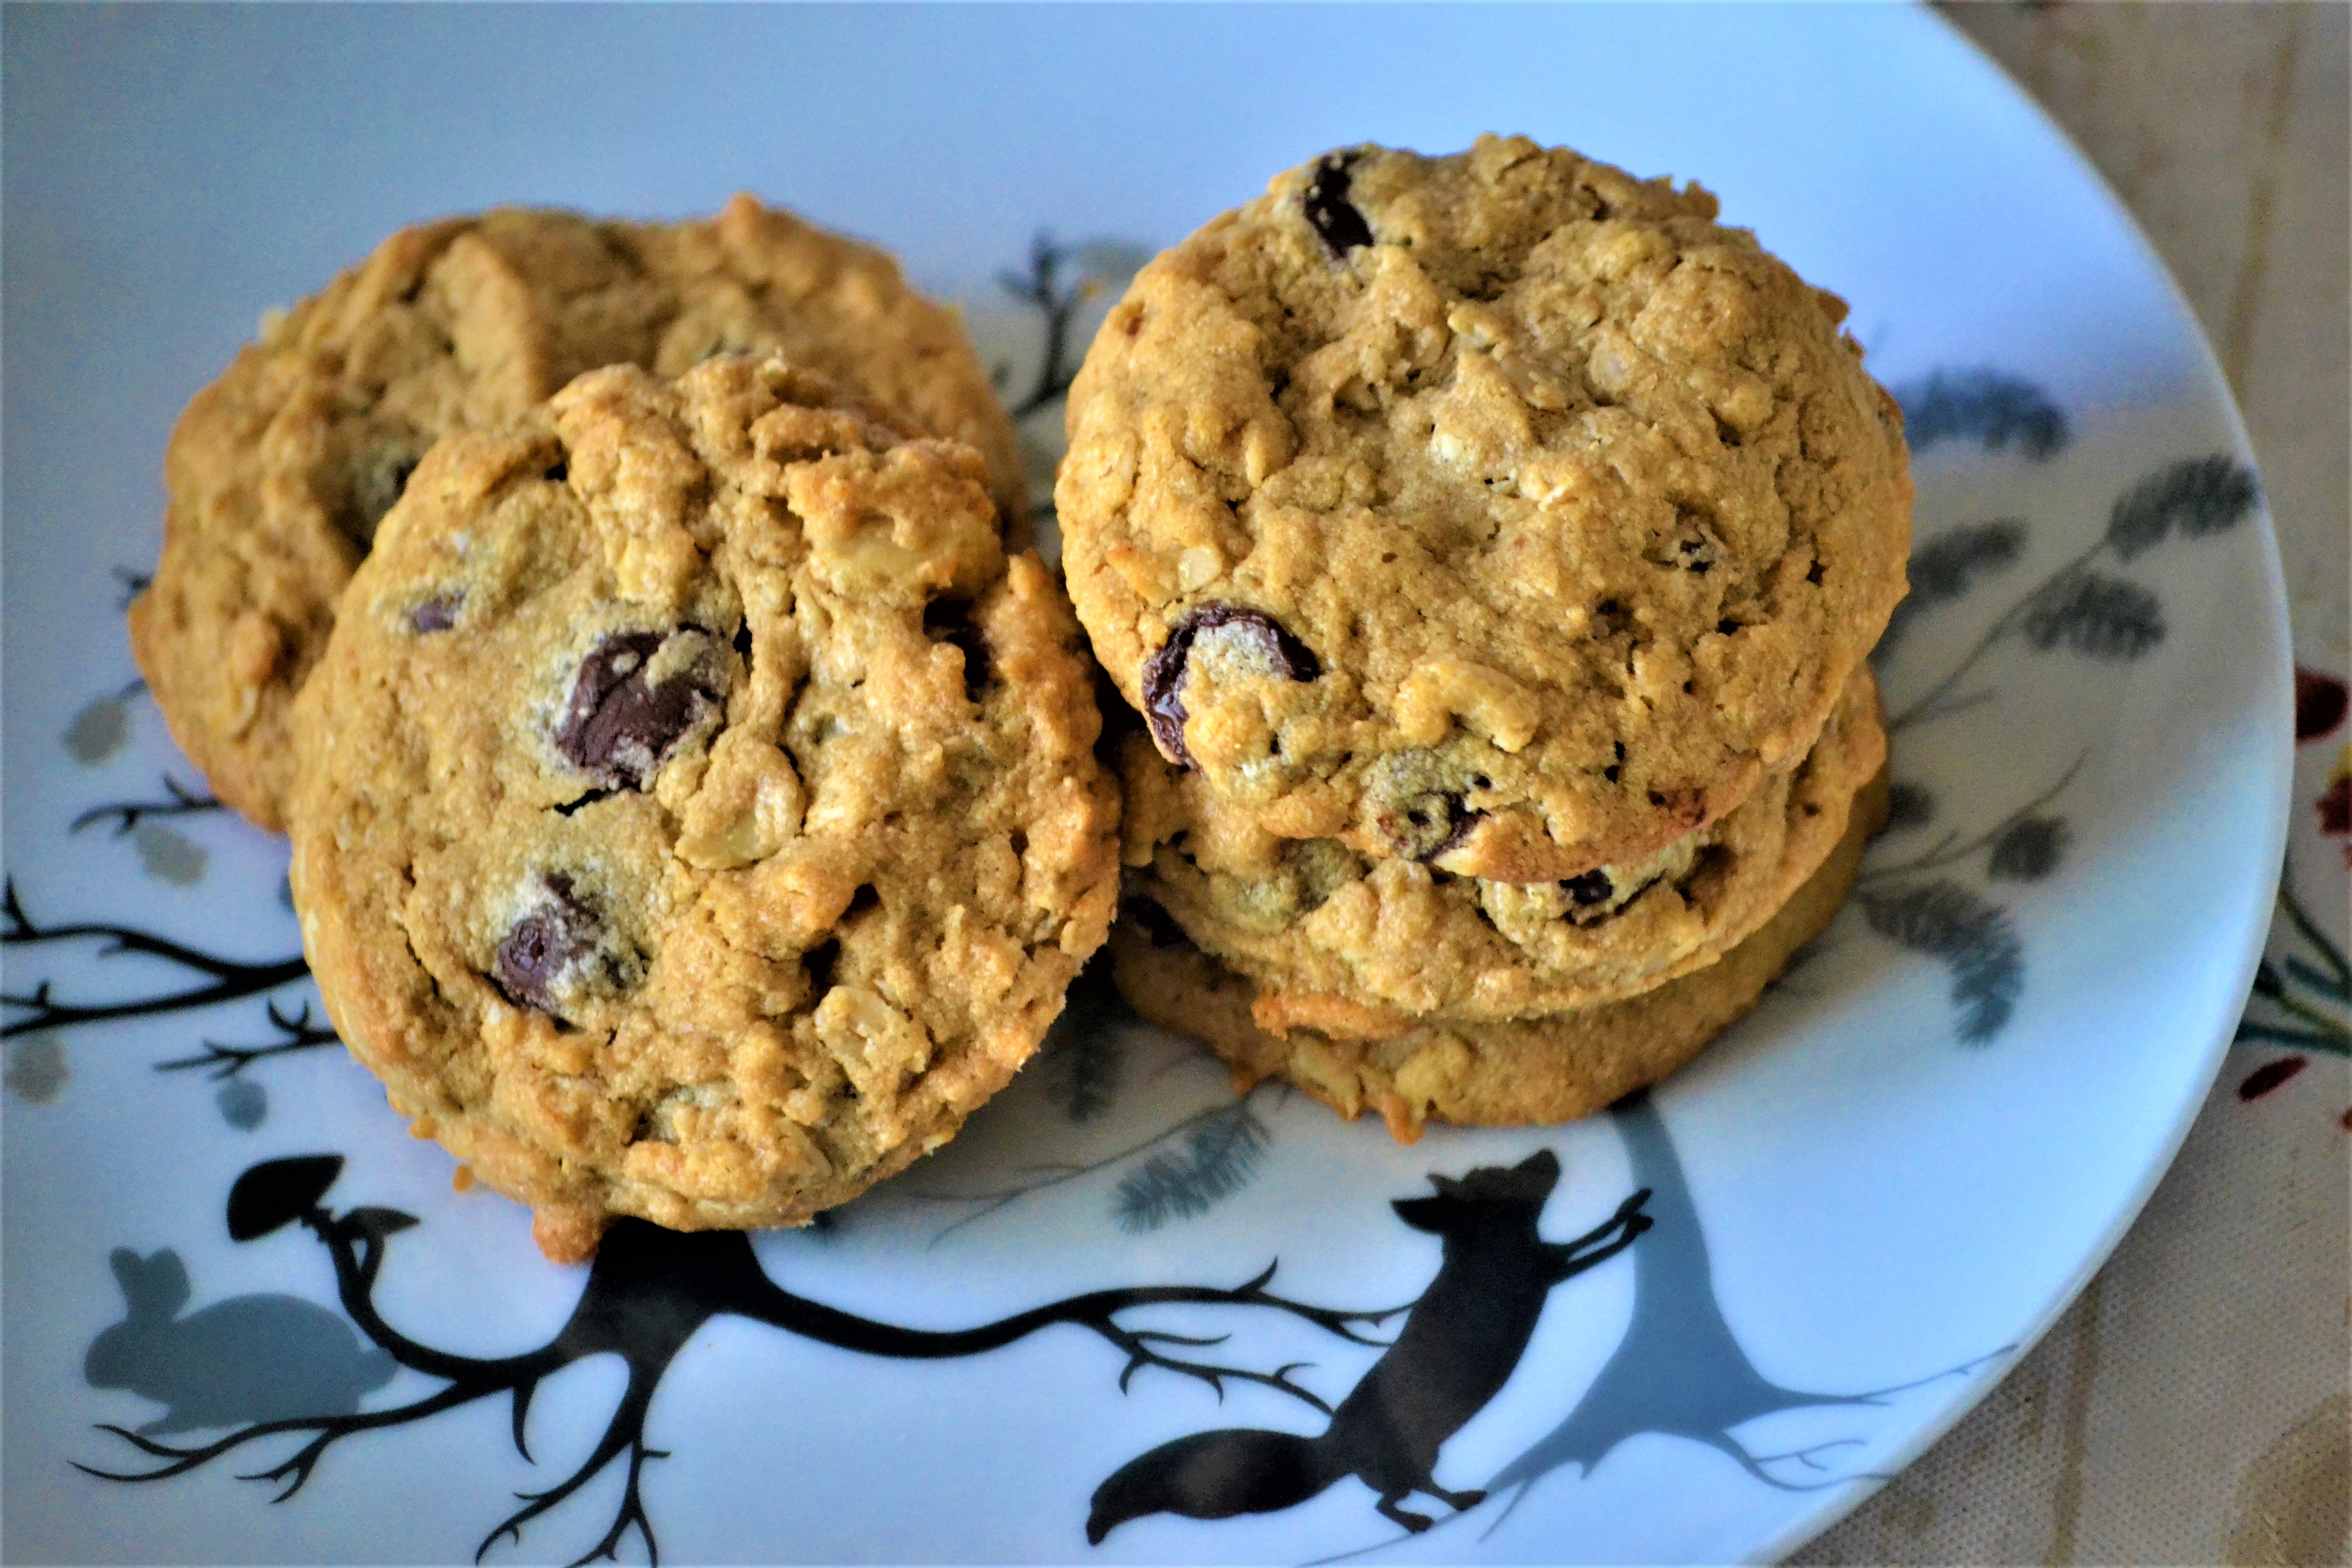 Gluten-Free Chickpea-Flour Chocolate Chunk Cookies with Peanut Butter and Oats